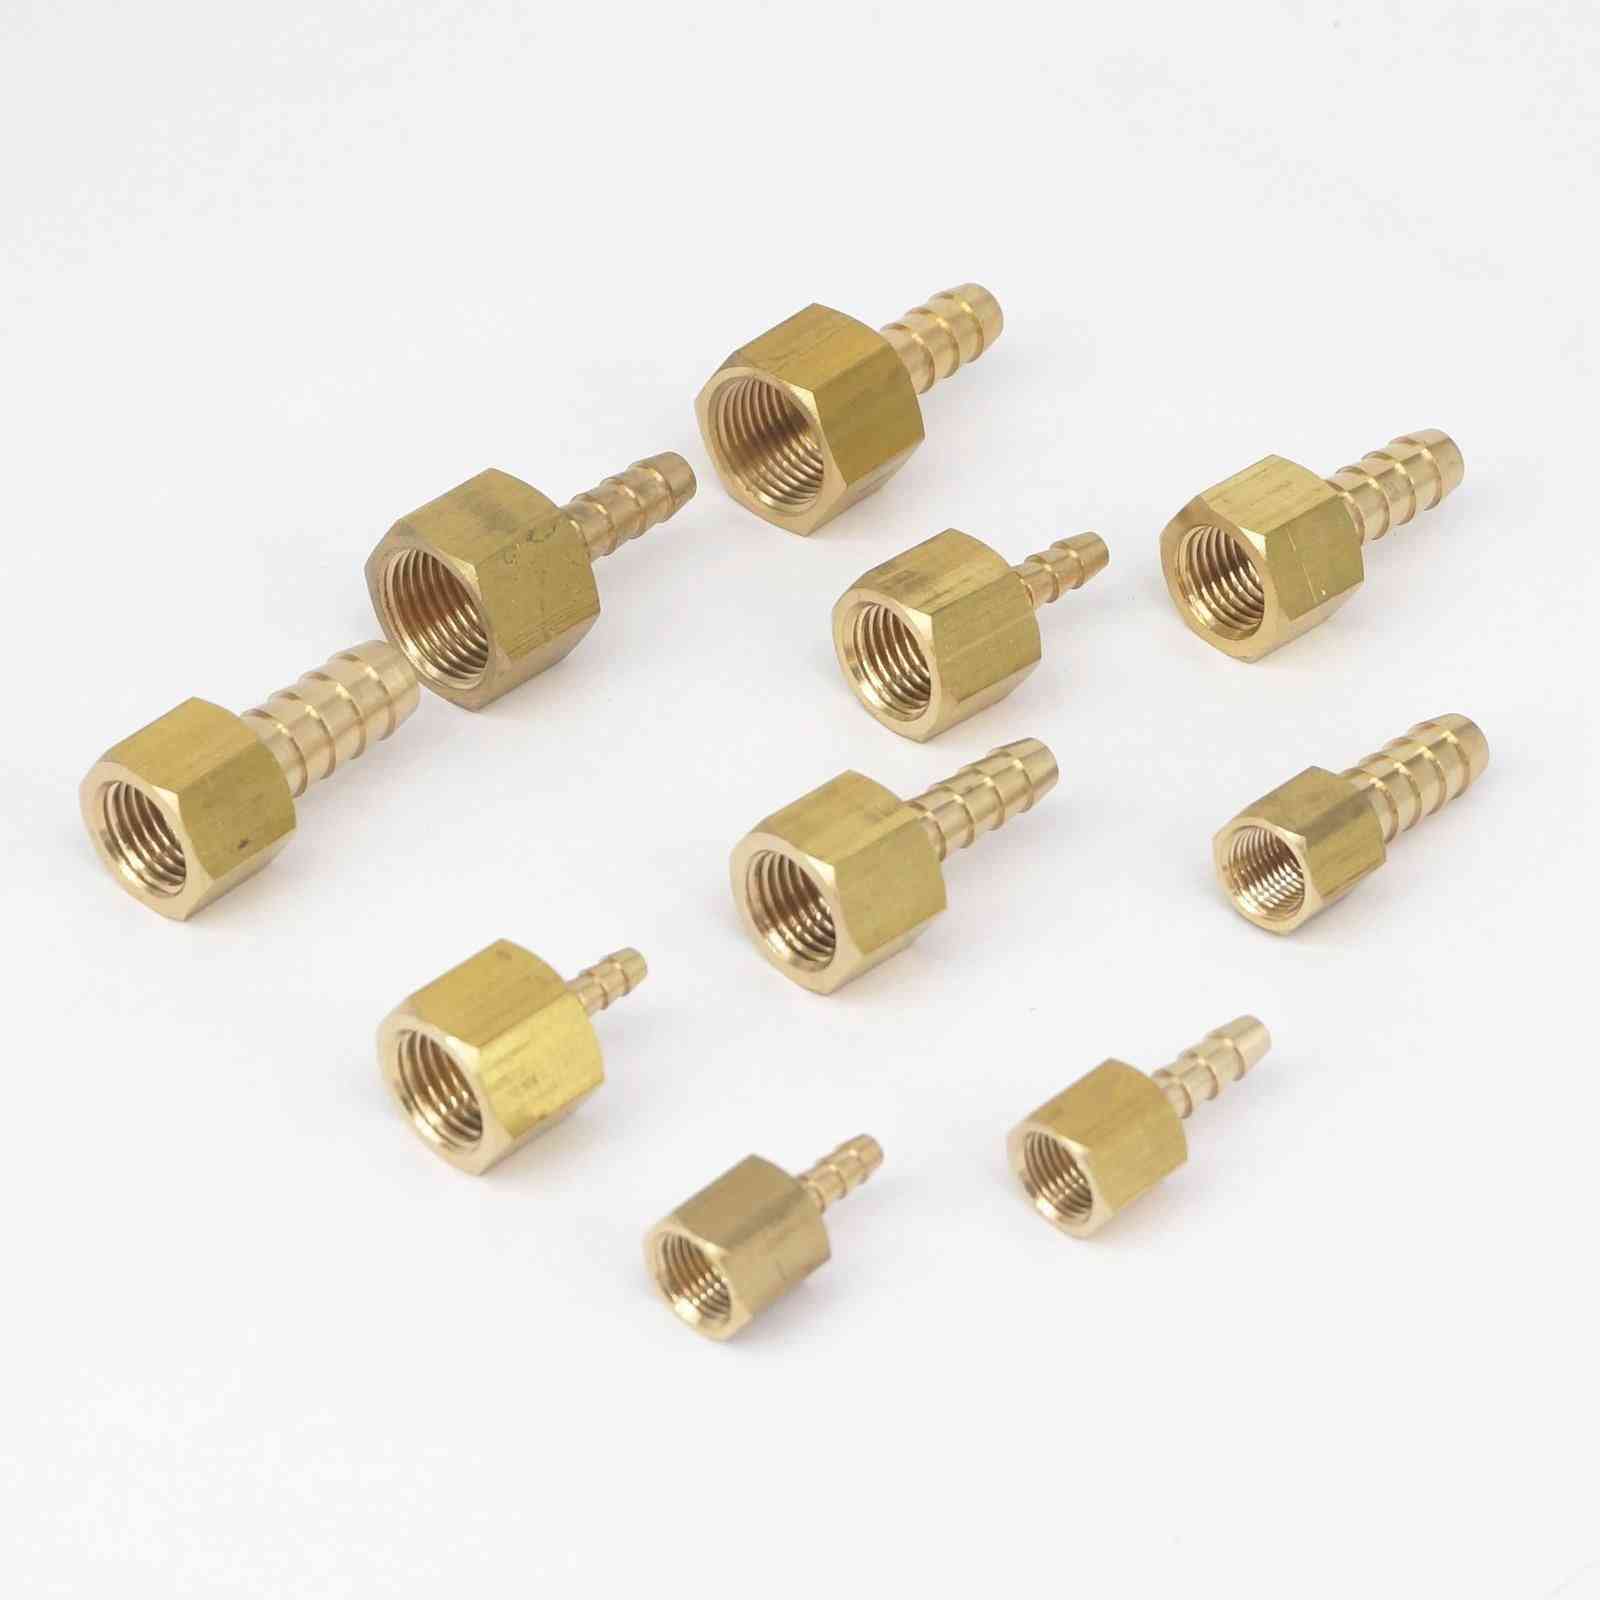 Hose Barb Tail Brass Fuel Fittings Connectors Adapters